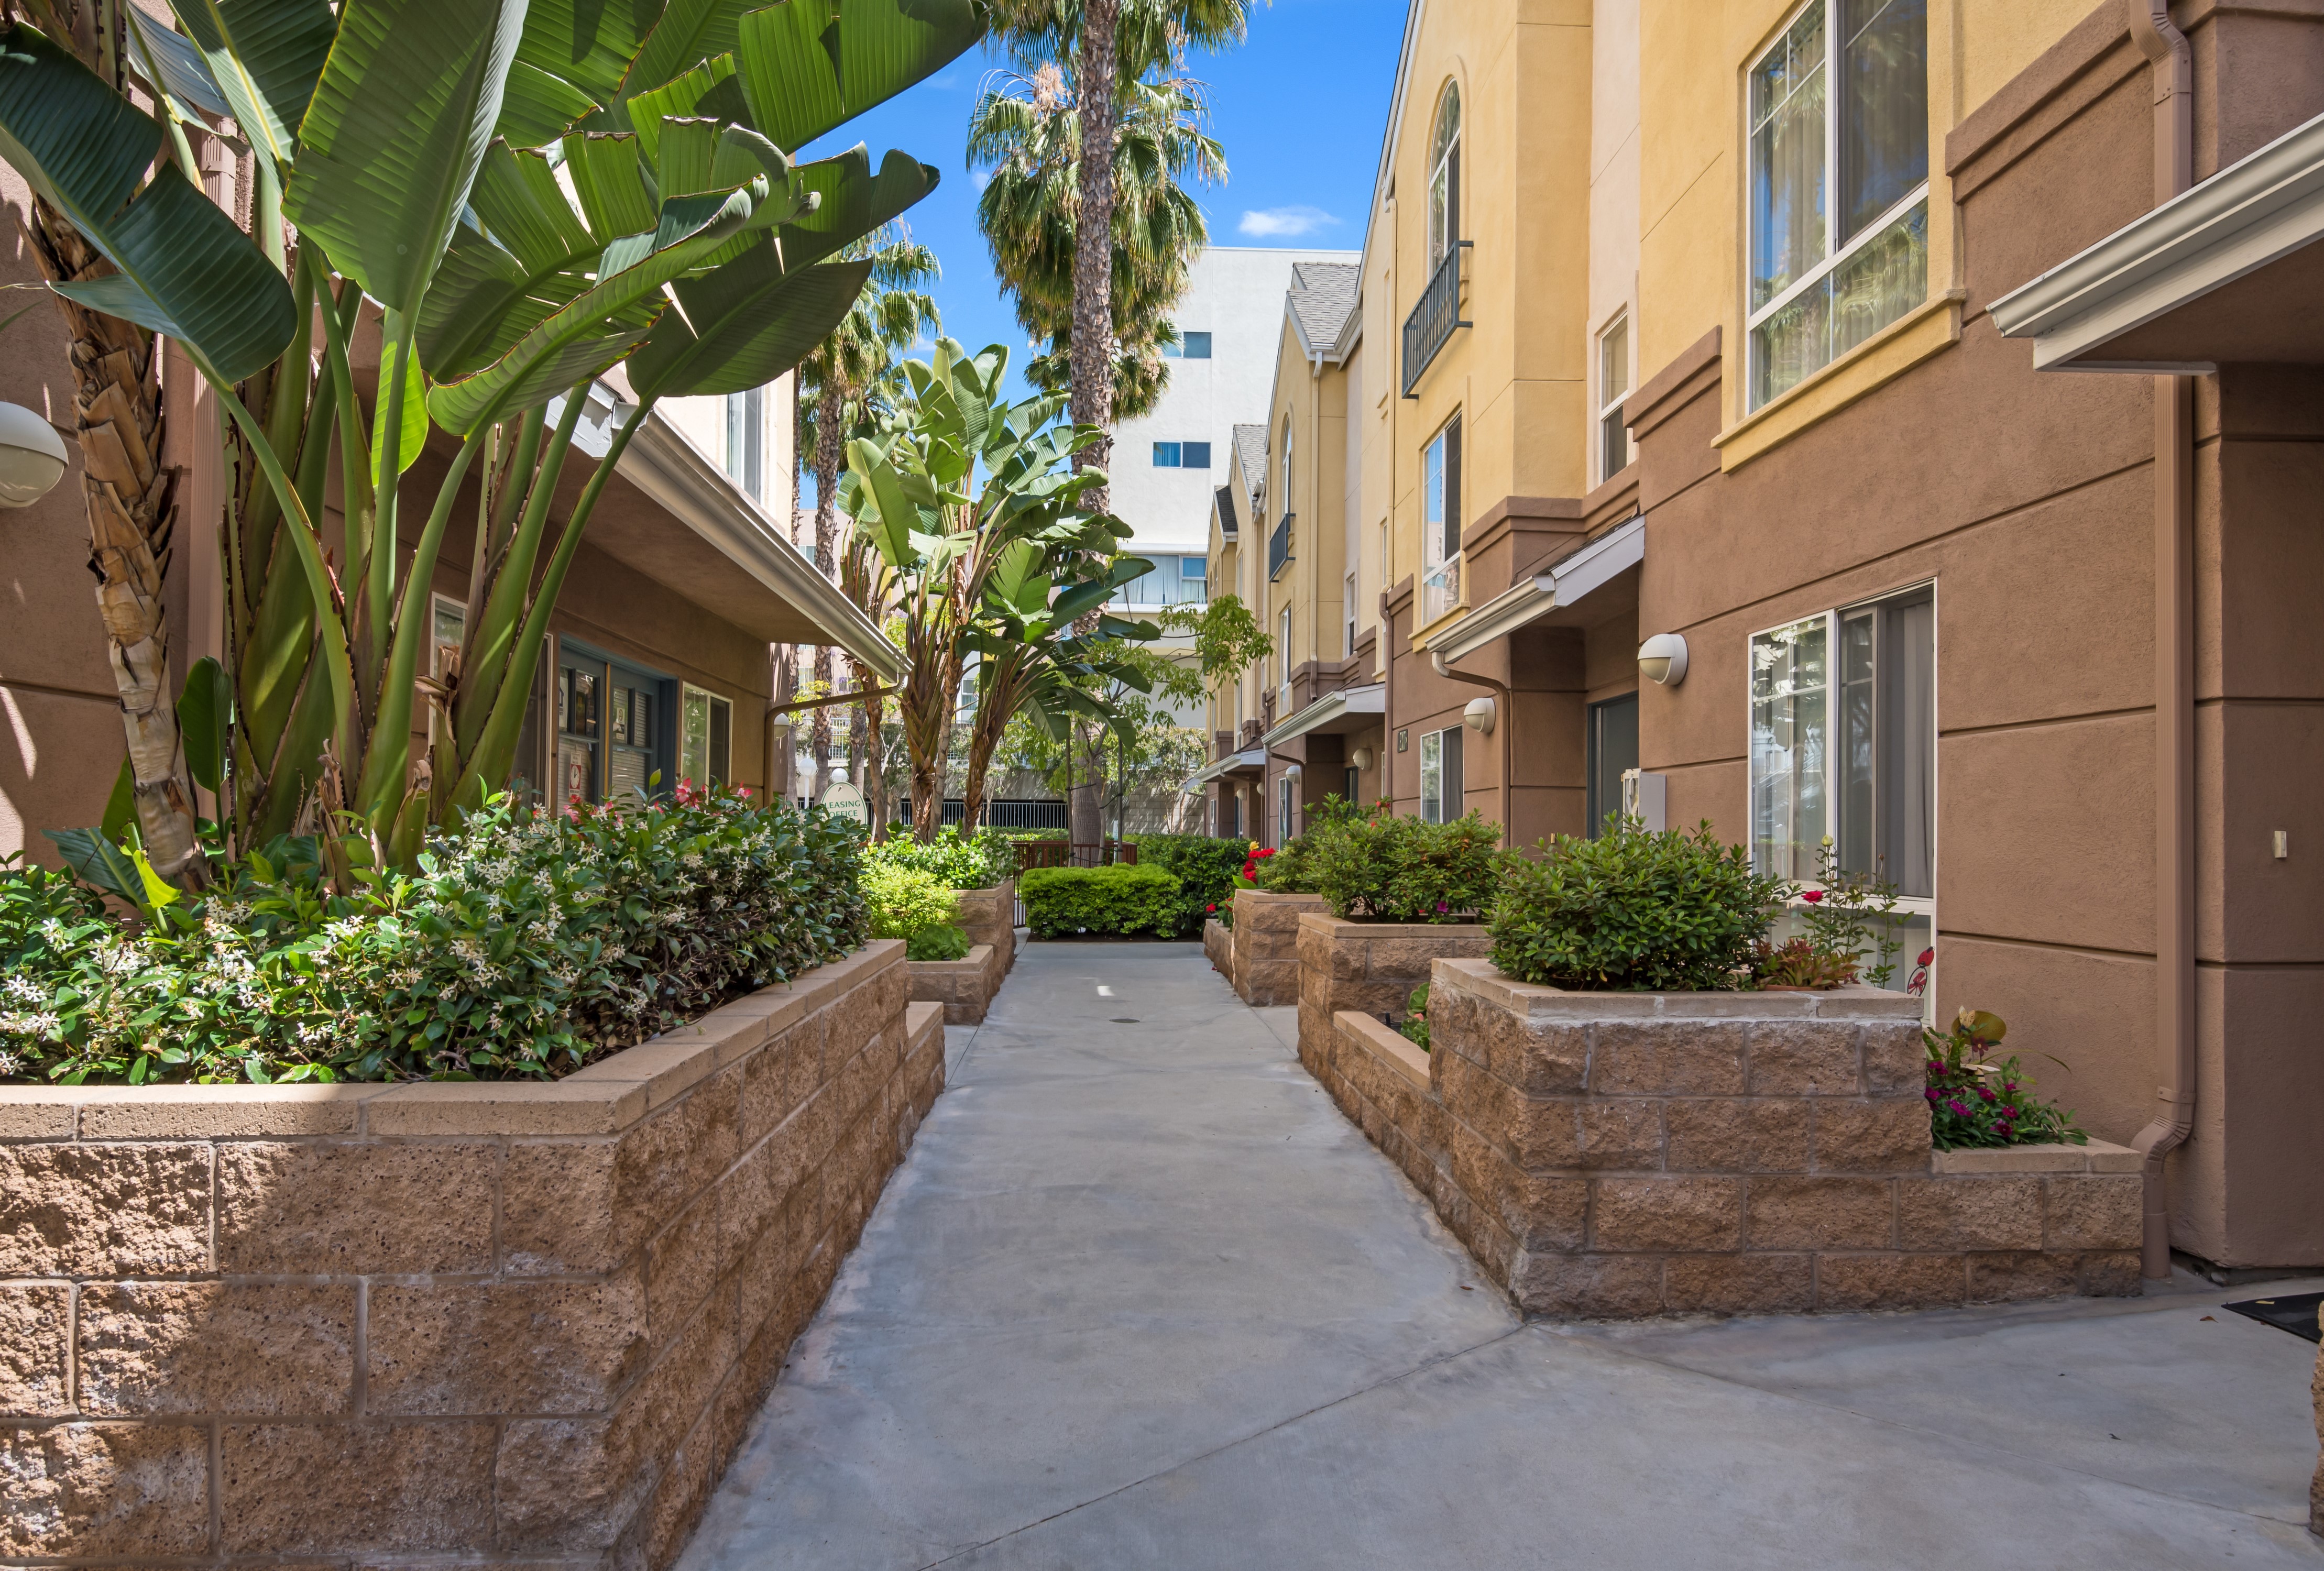 Exterior view of Western Carlton Apartments, cemented walkway with planters filled with shrubbery attached to the buildings on both sides of the walkway